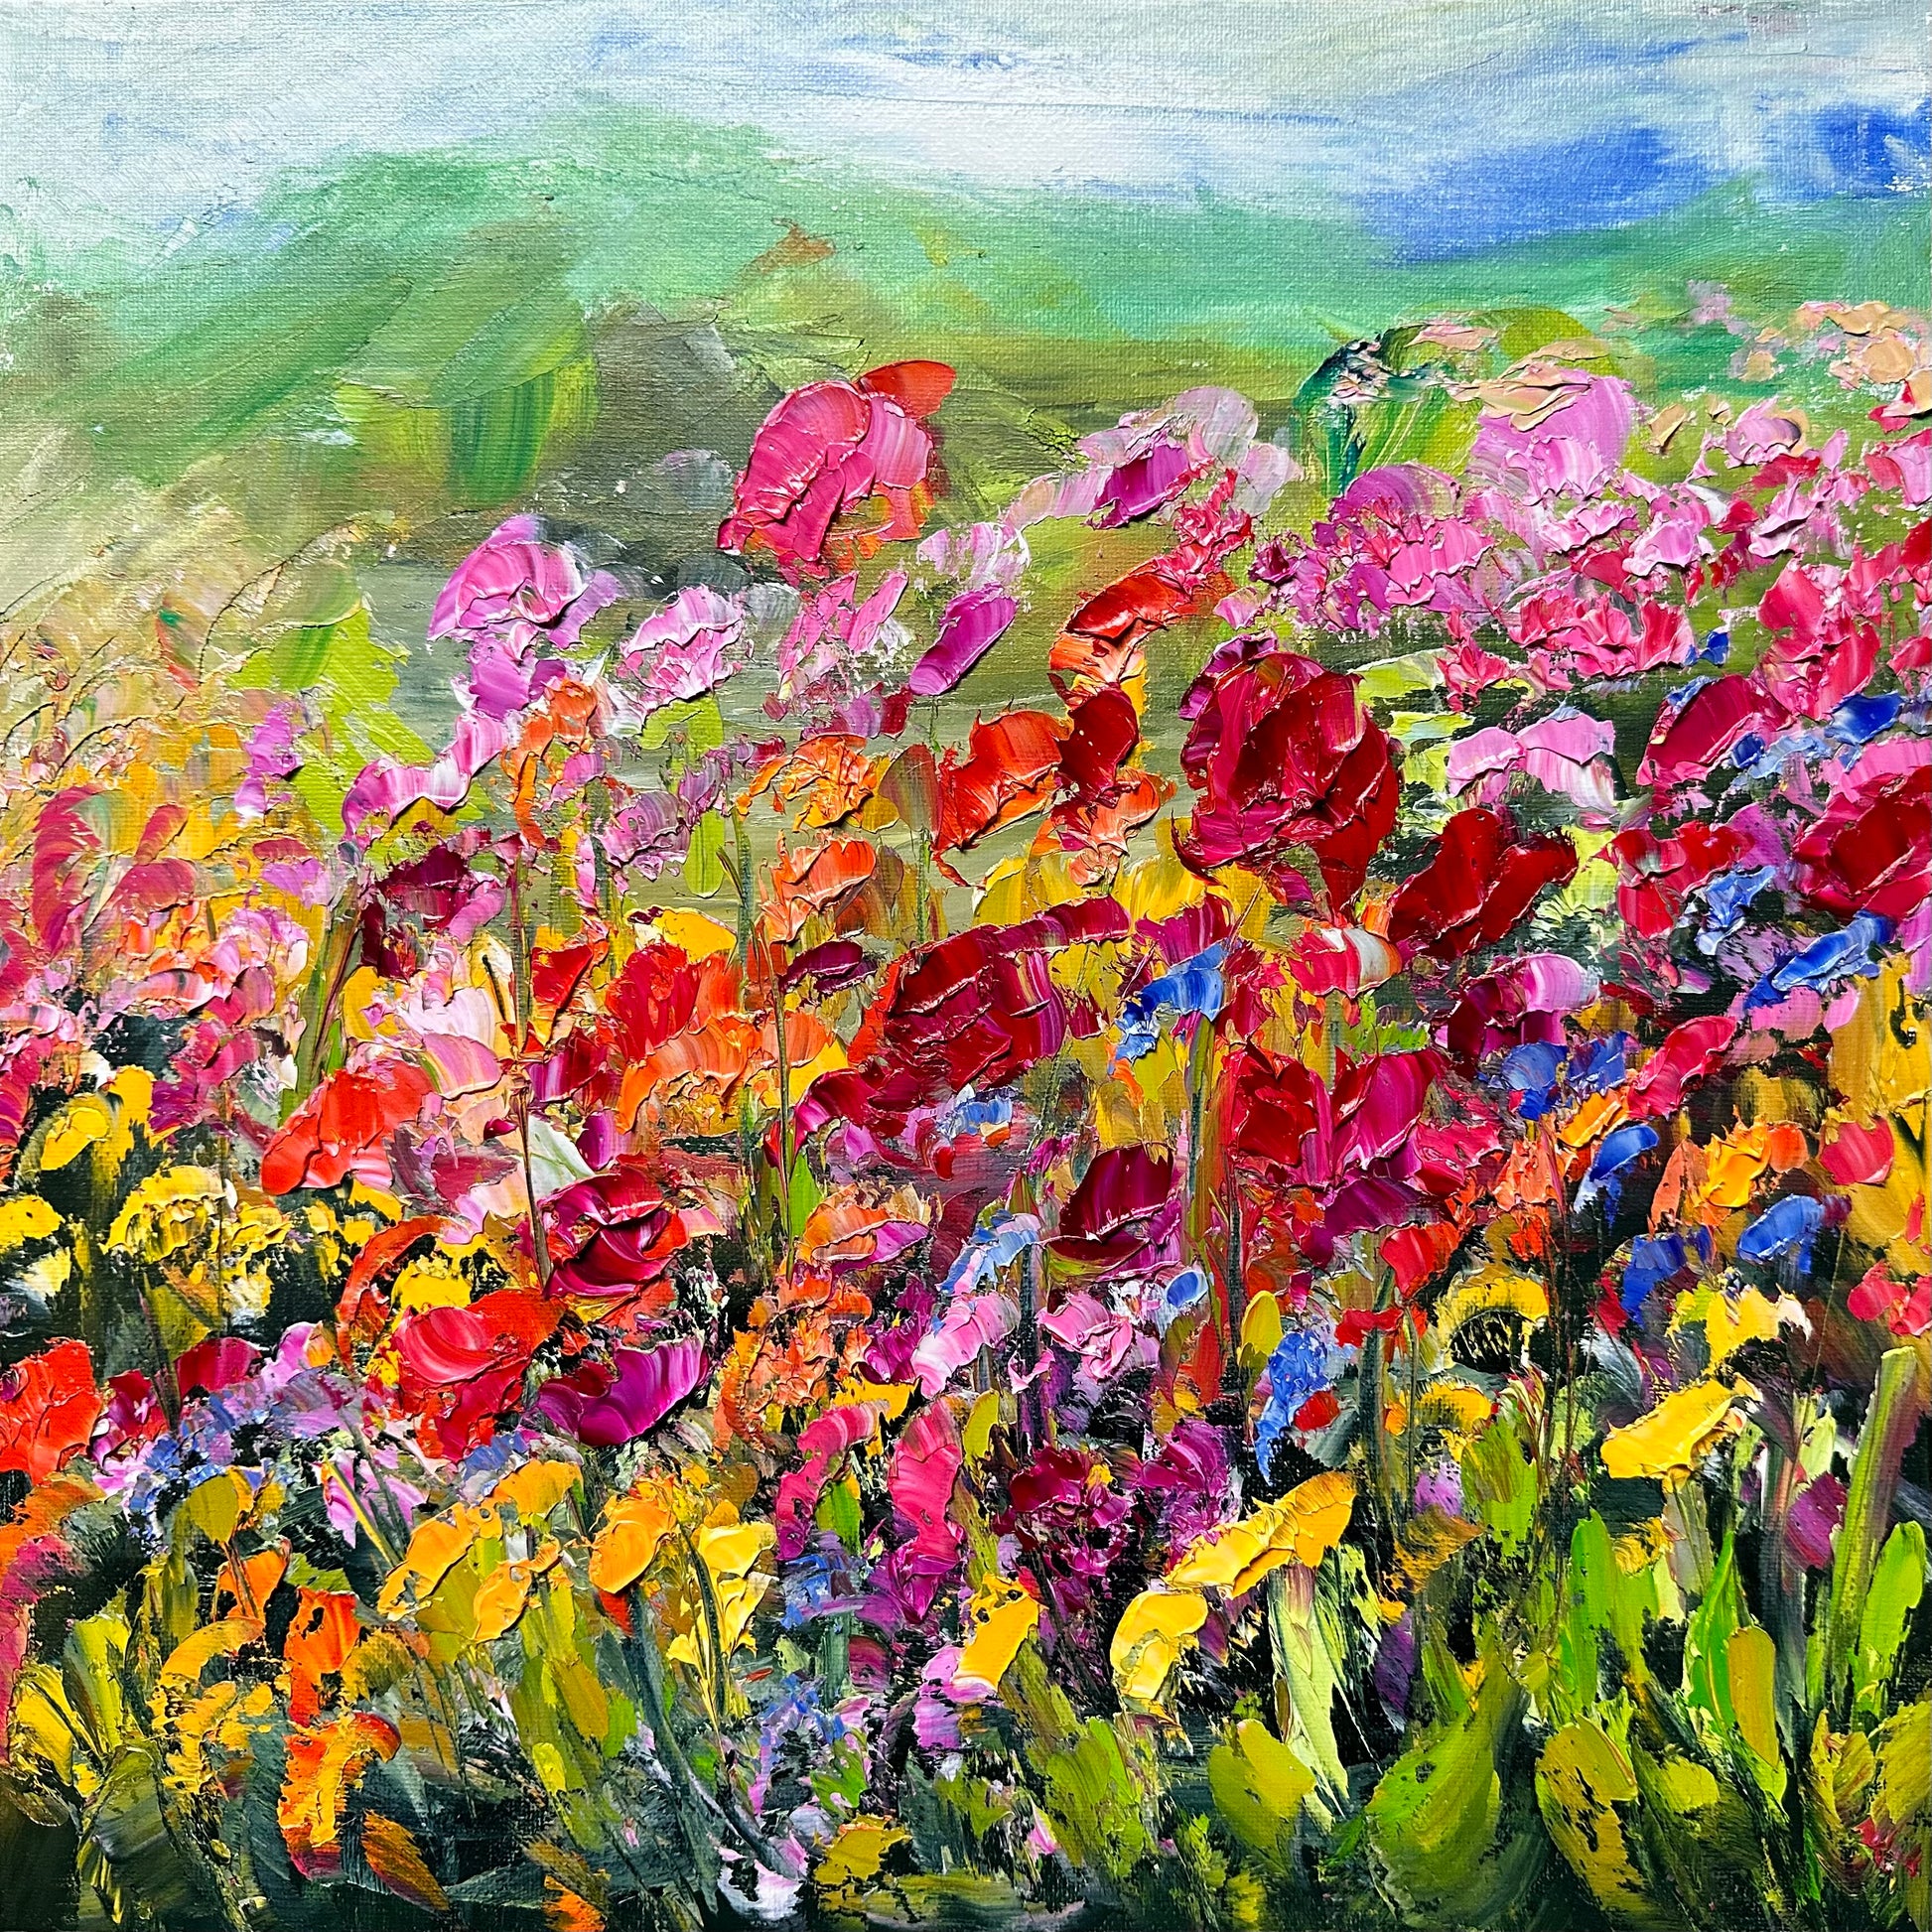 abstract impressionist oil painting of a flower field of all colors measuring 14" x 14"